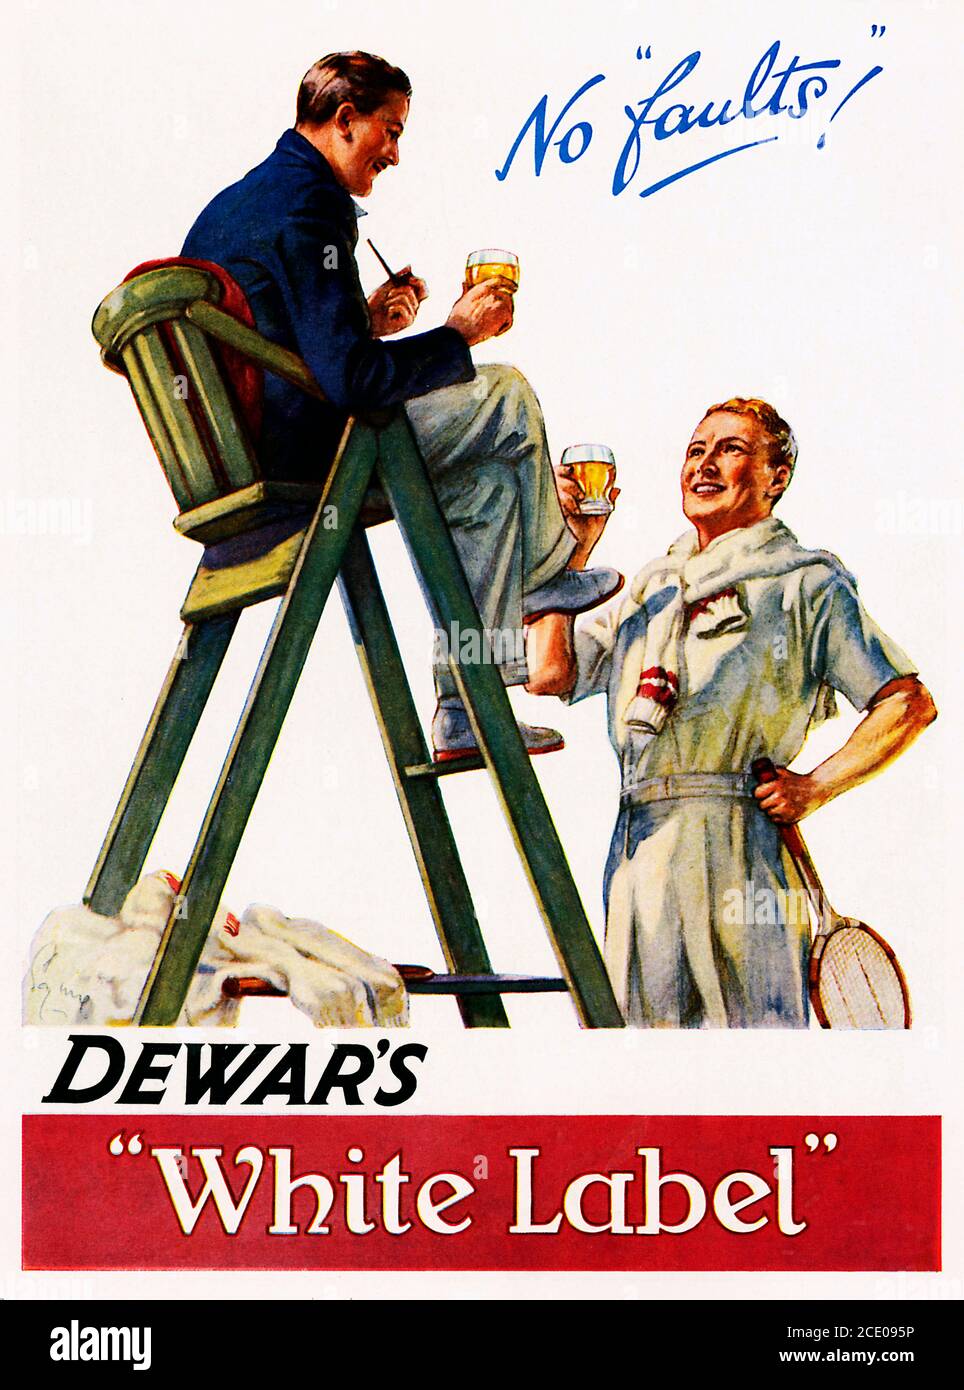 Dewars, No Faults for the 1930s ad vert for the Scotch whisky refreshing both the tennis umpire and player in a drinks break from a hard match Stock Photo